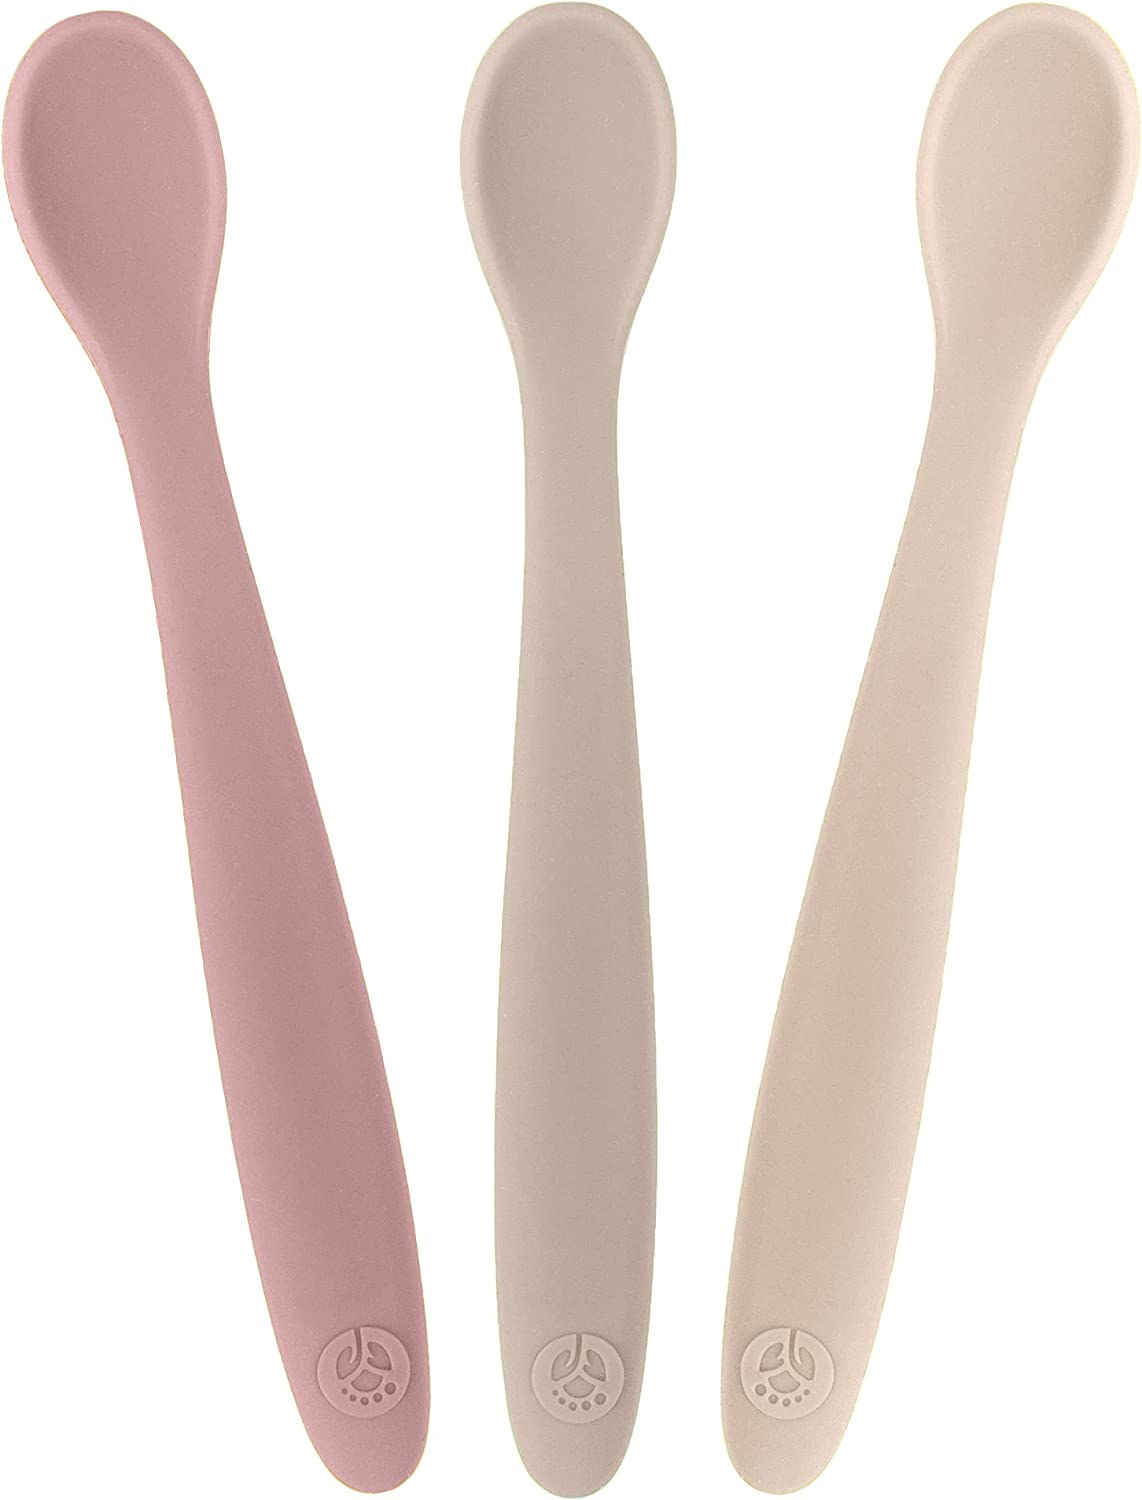 WeeSprout Silicone Baby Spoons – First Stage Feeding Spoons for Infants, Soft-Tip Easy on Gums, Bendable Design Encourages Self-feeding, Ultra-durable & Unbreakable, Dishwasher & Boil-proof, Set of 3